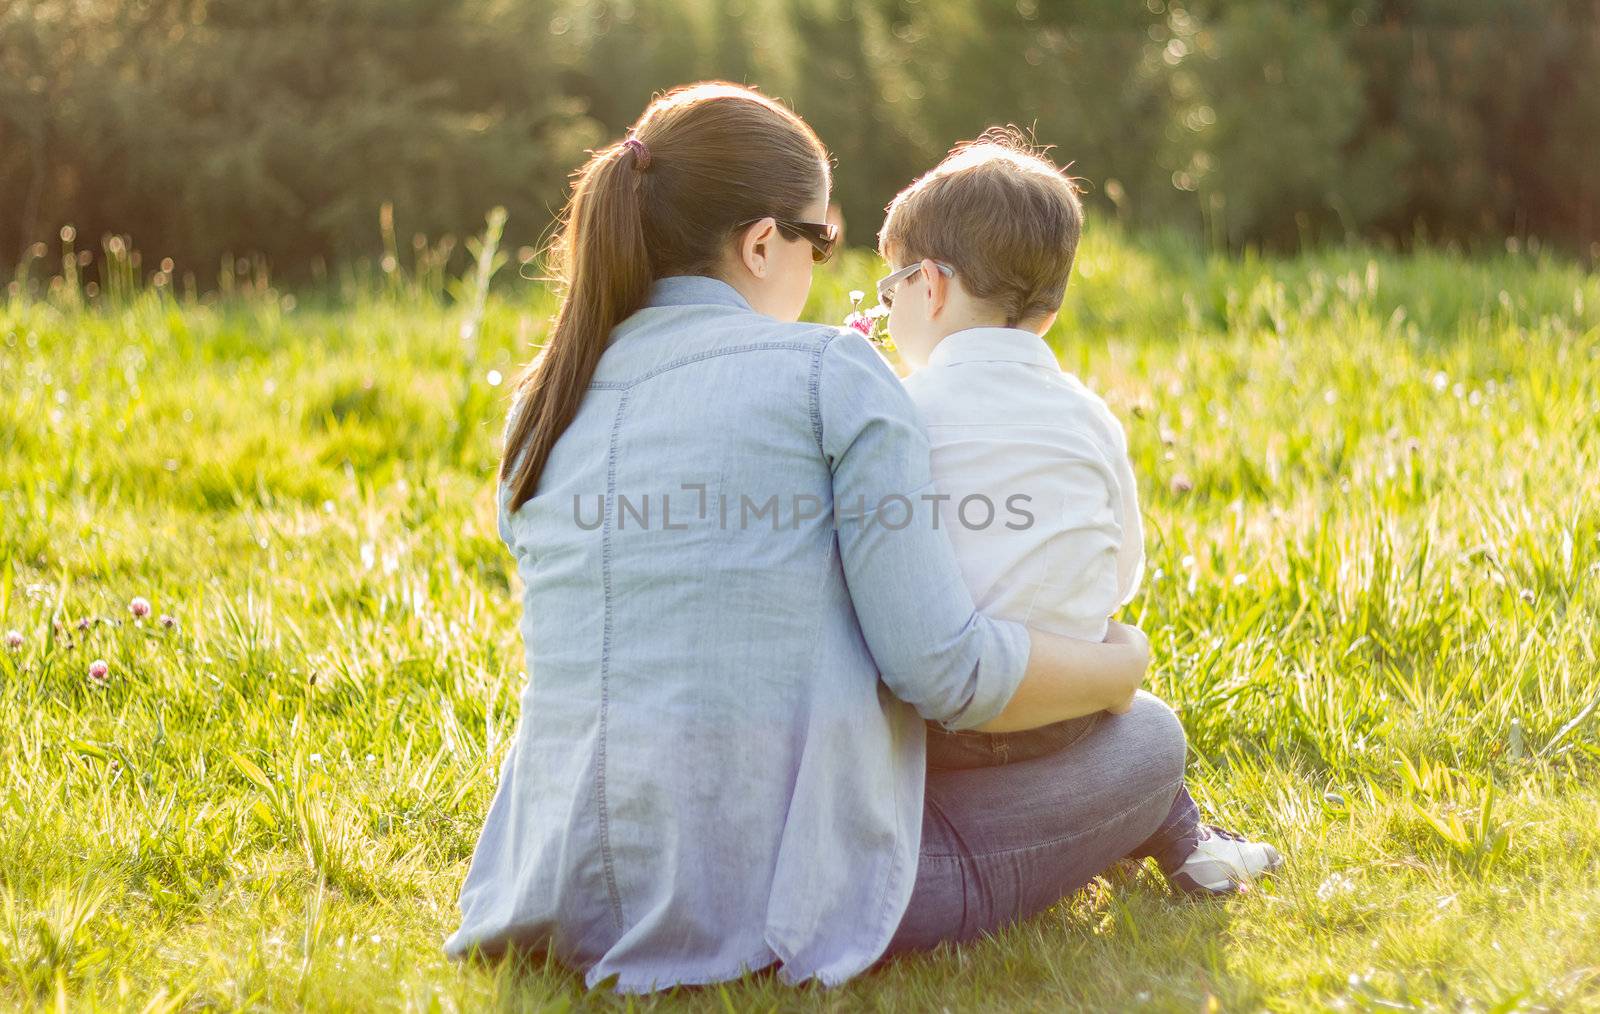 Back view of cute son giving a bouquet of flowers to his mother sitting in a sunny field